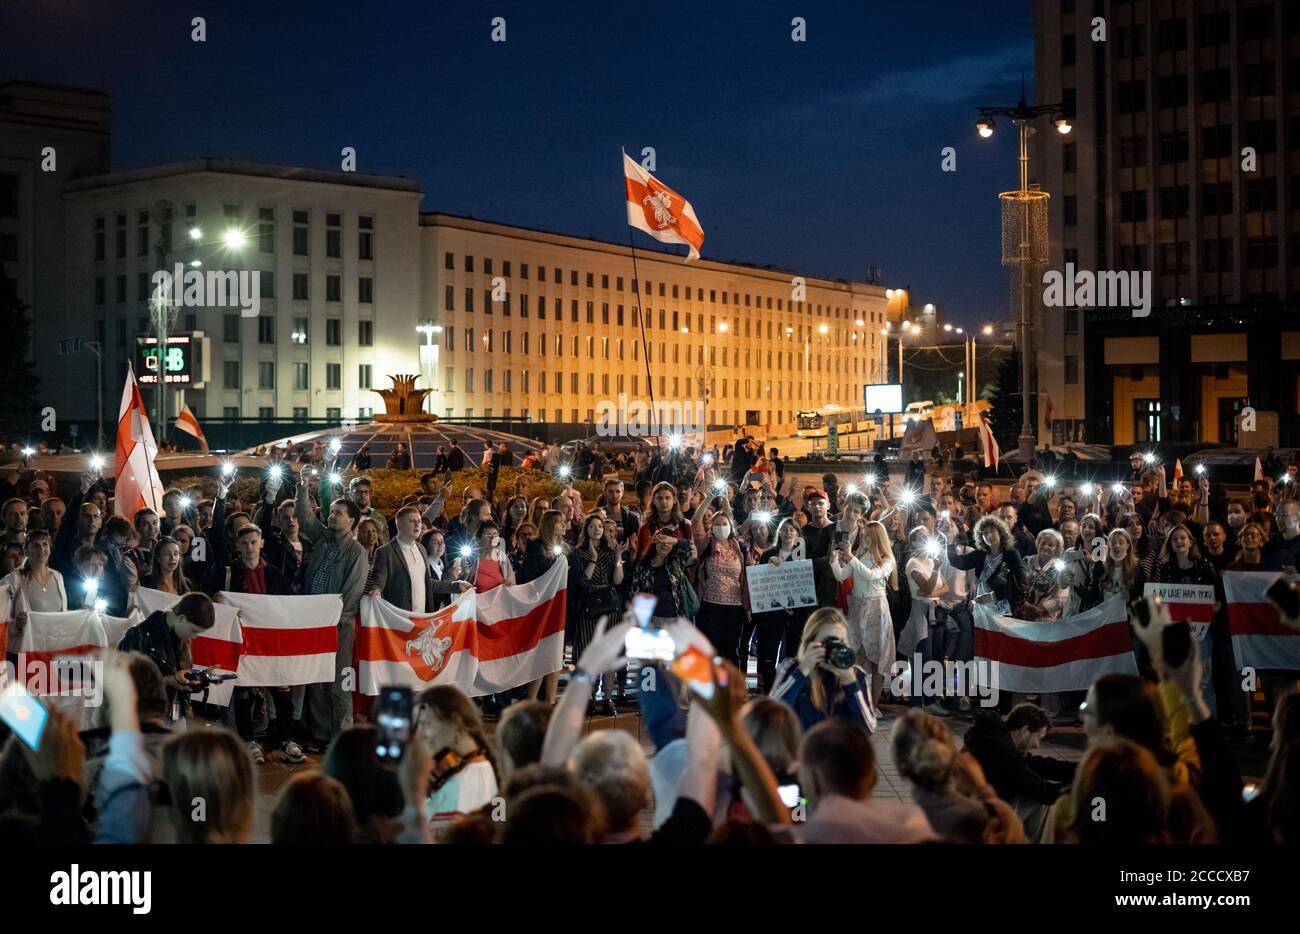 Minsk, Belarus - August 21, 2020: Belarusian people participate in peaceful protest after presidential elections in Belarus on Independence Square in Stock Photo